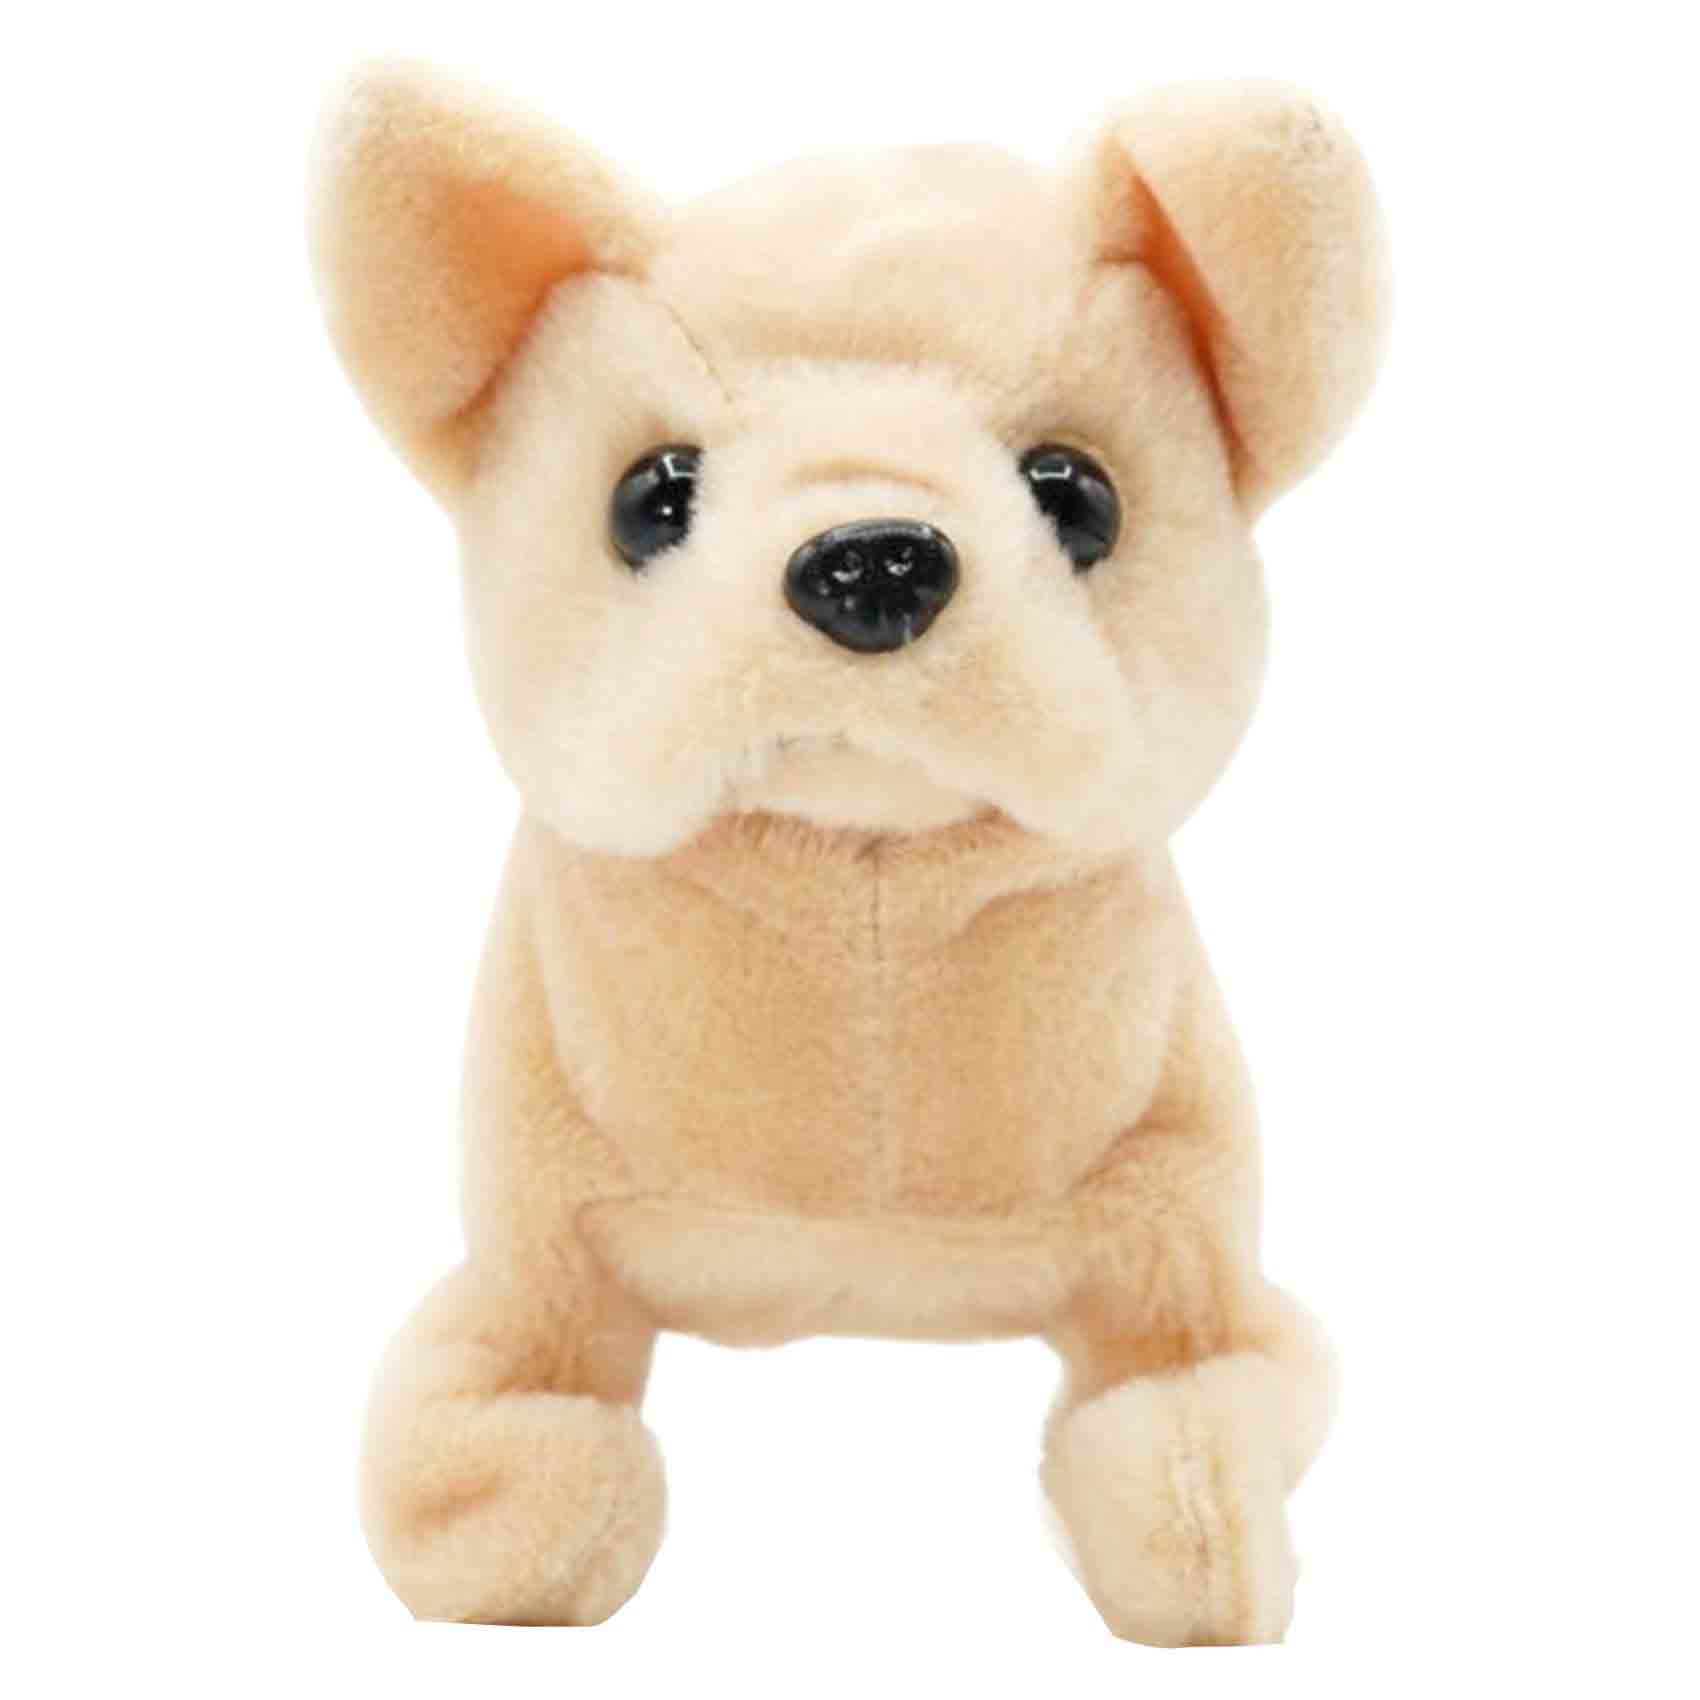 Pugs At Play Goldie The Golden Retriever Plush Toy Beige